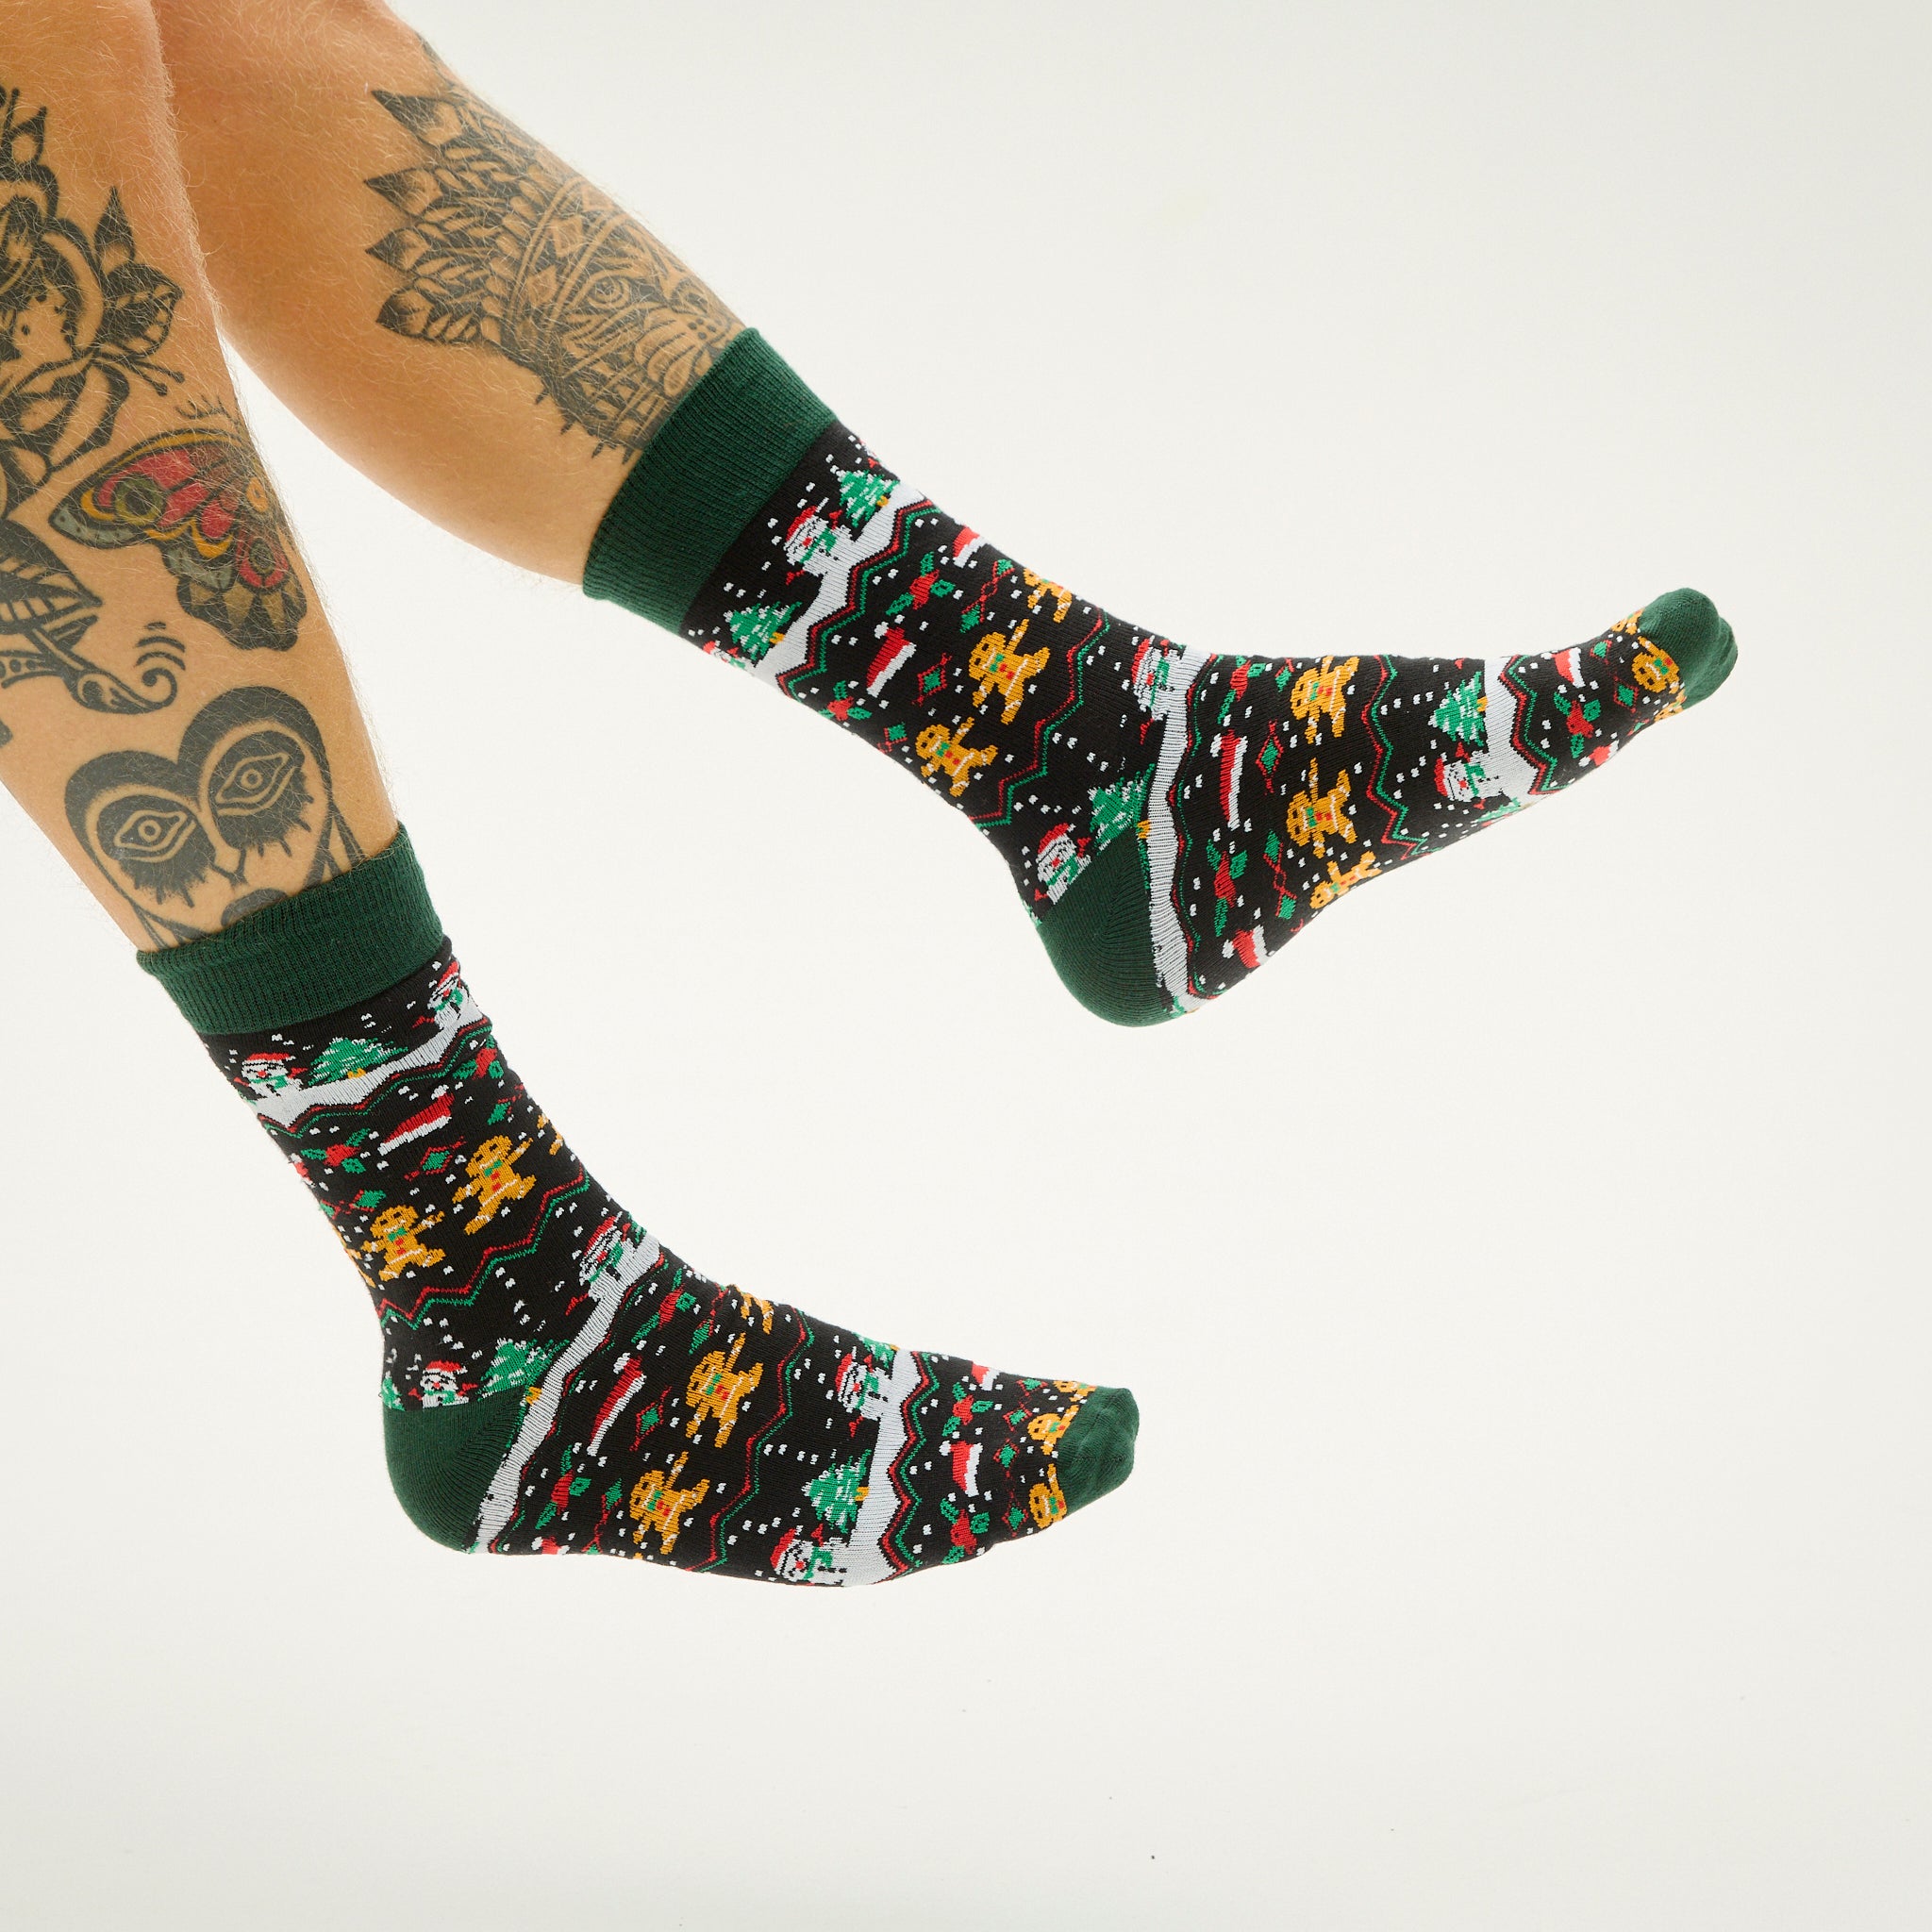 The Chilled Christmas Socks